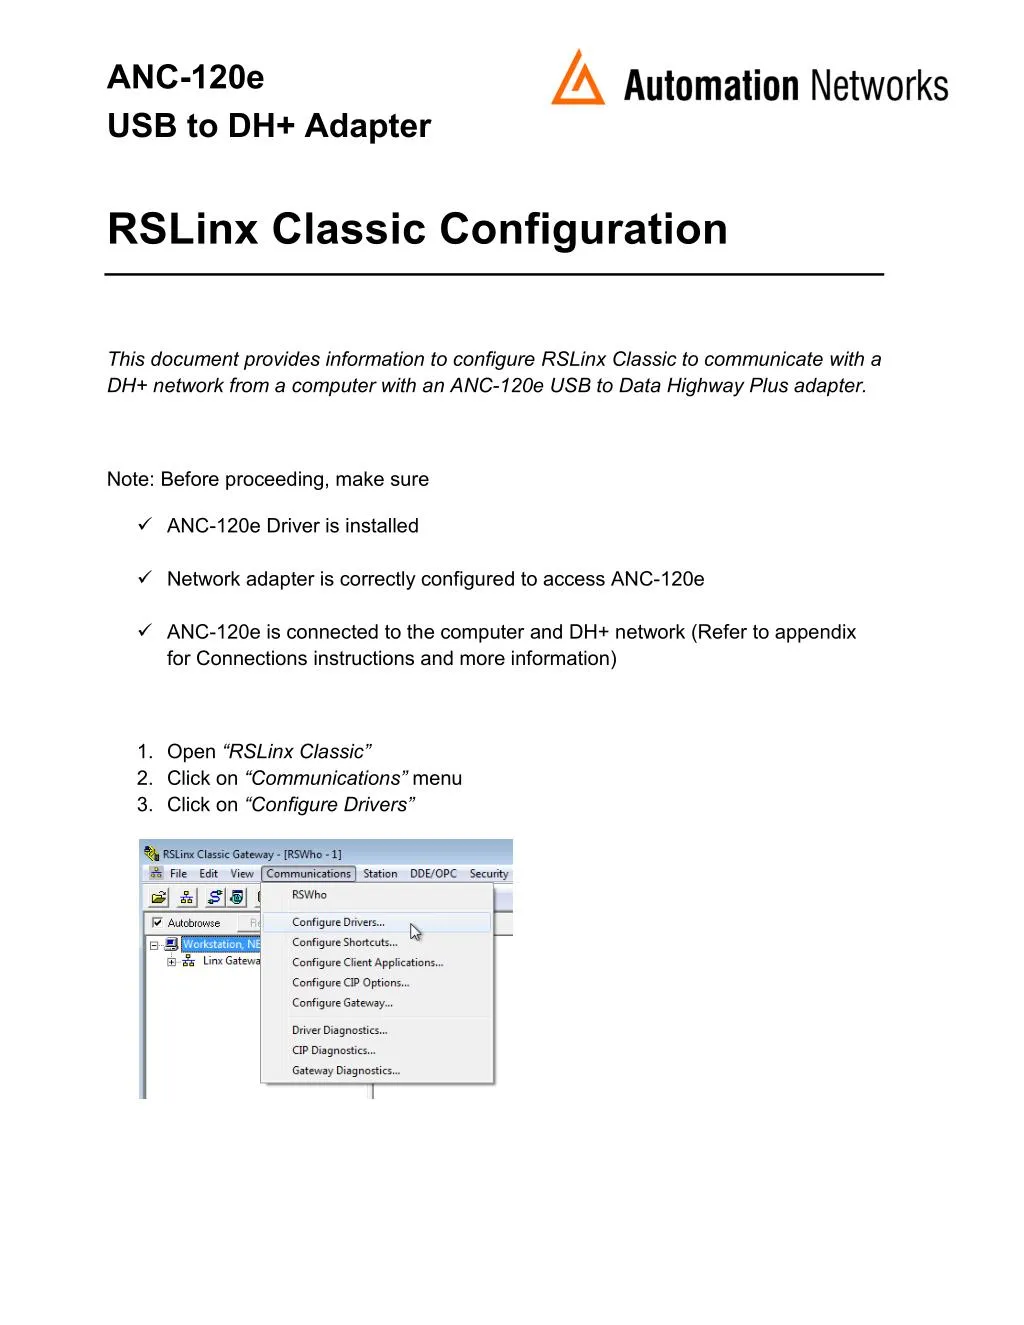 rslinx classic 2.57 free download